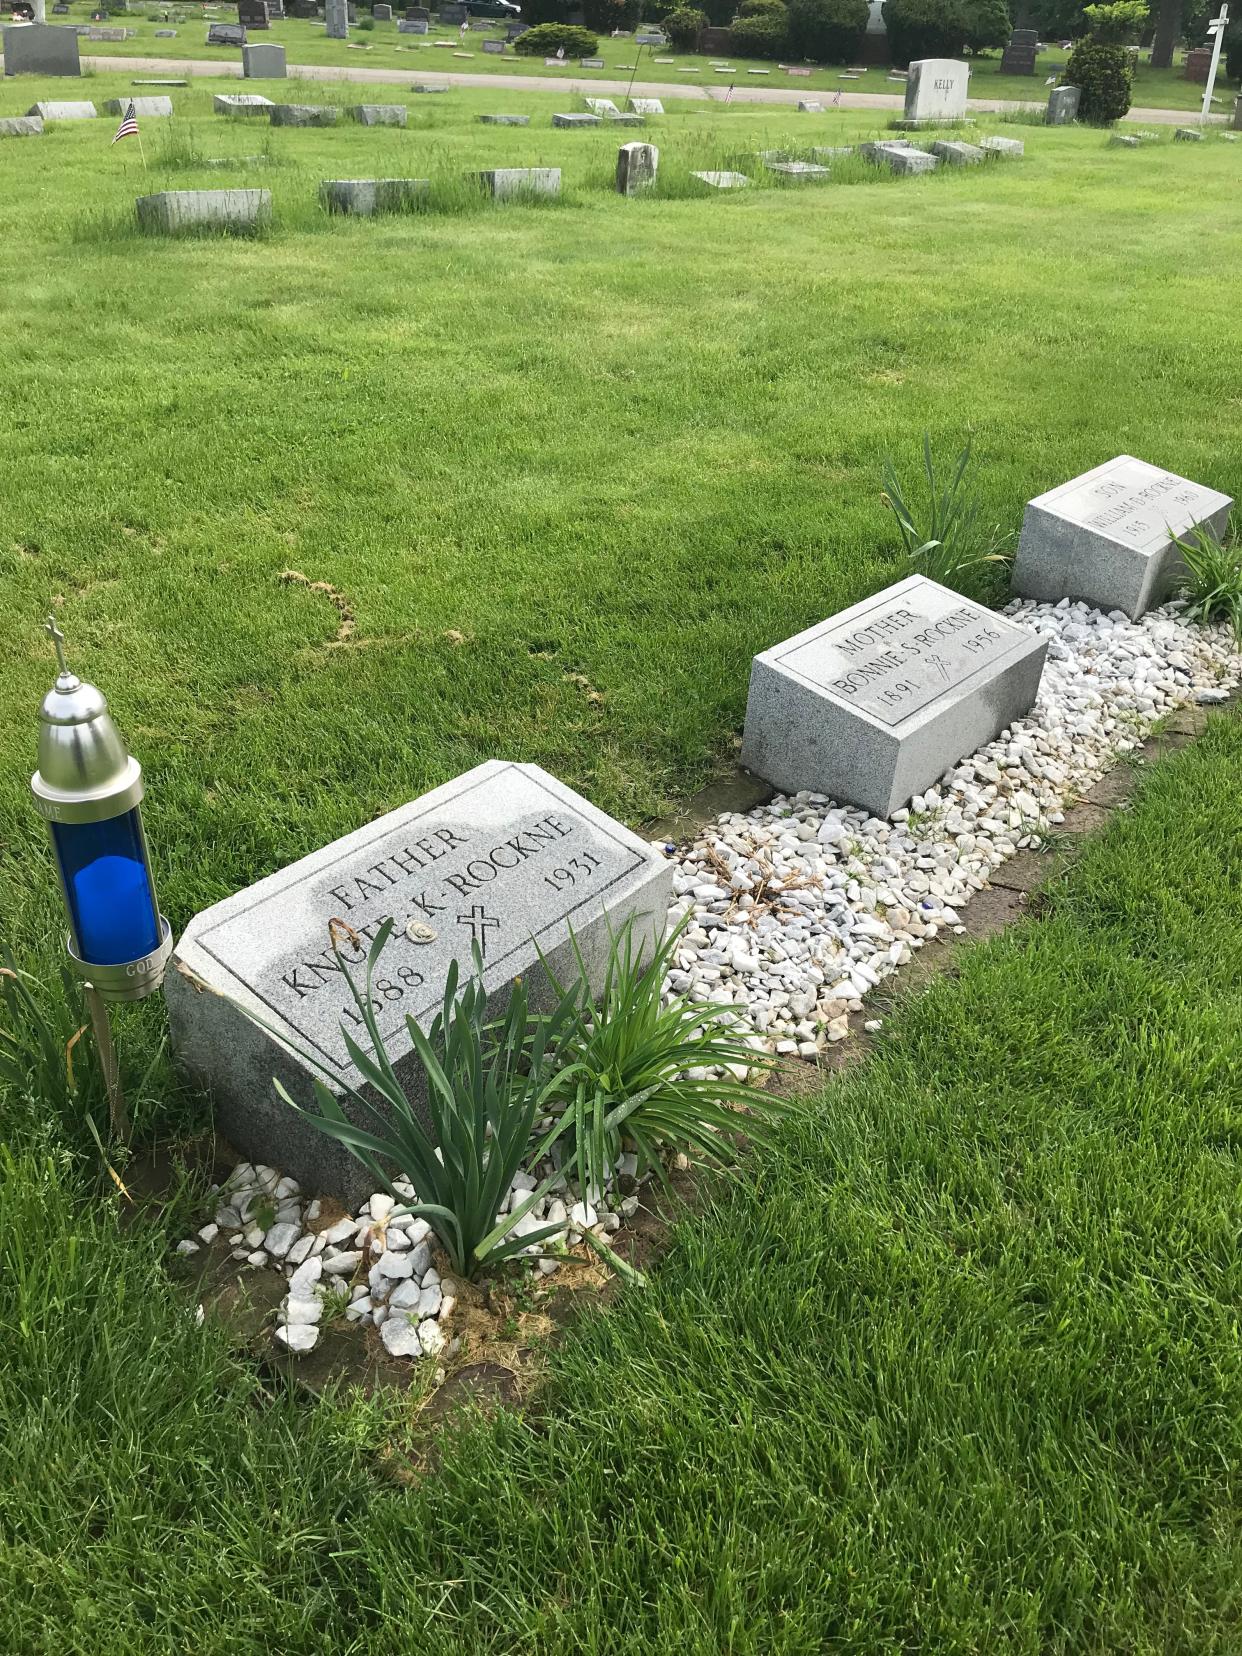 The gravestones of Knute Rockne, his wife and son,